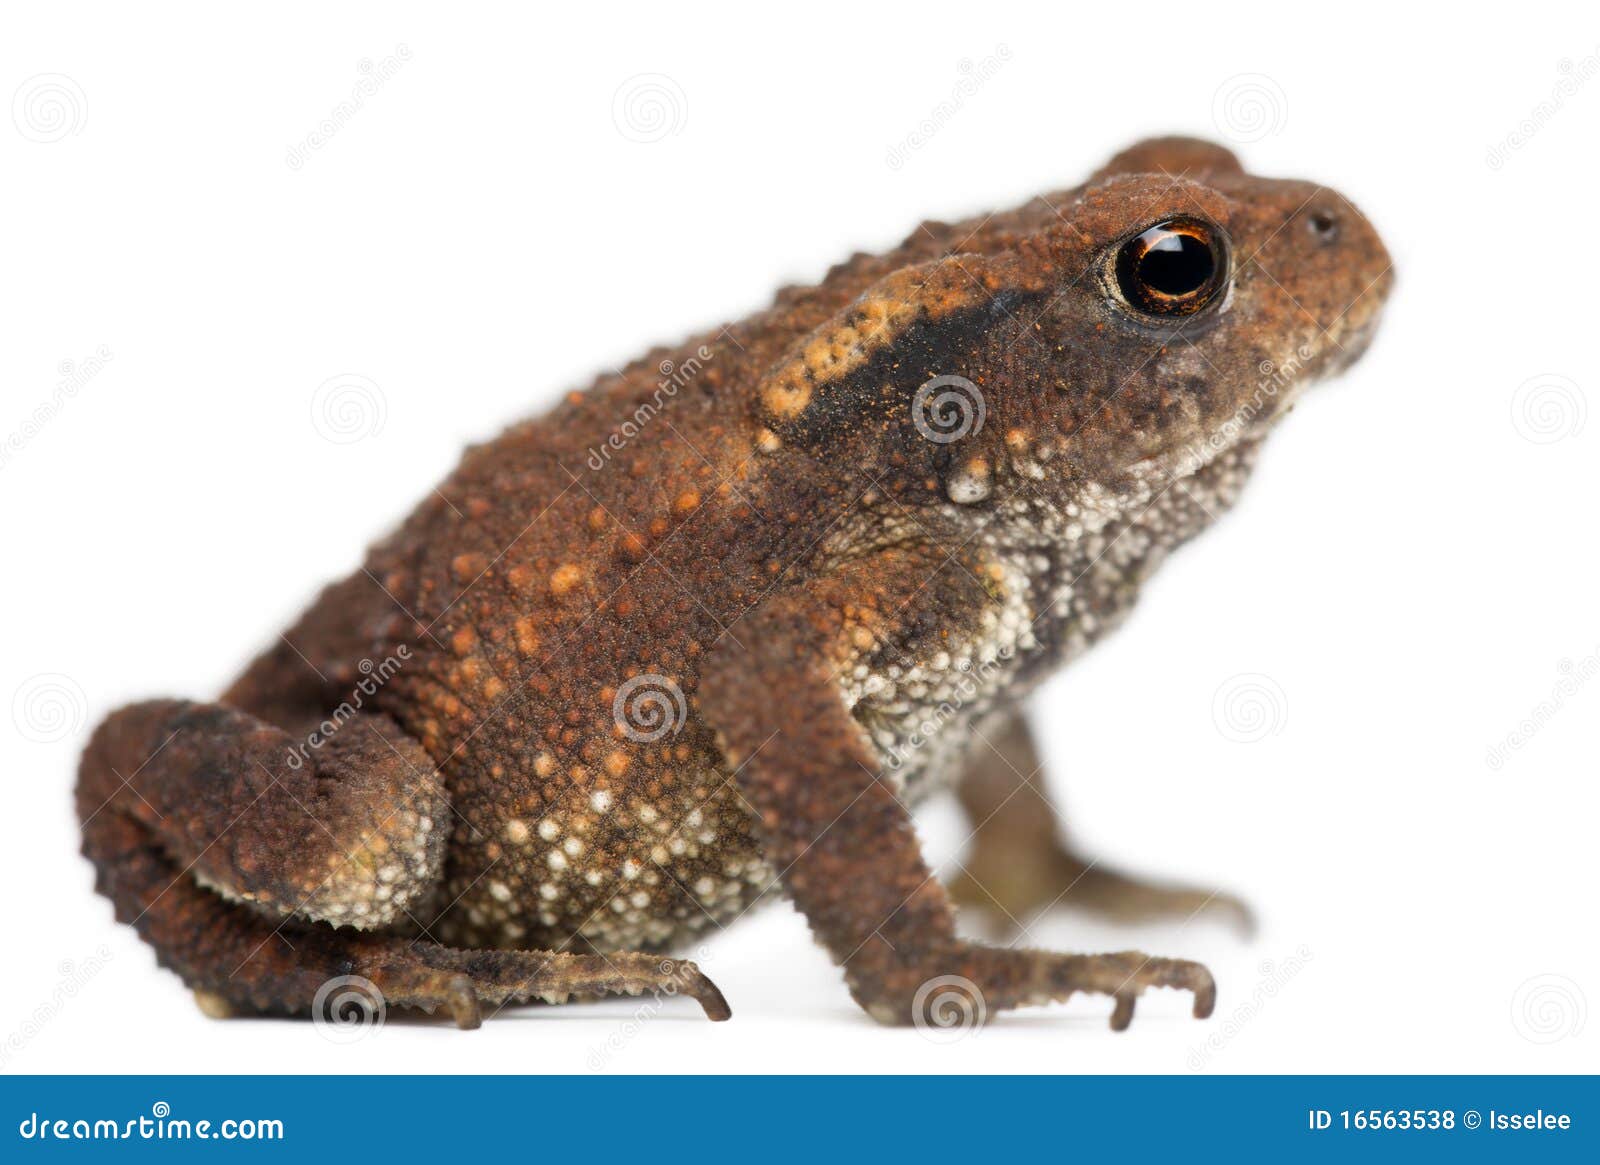 young common toad, bufo bufo